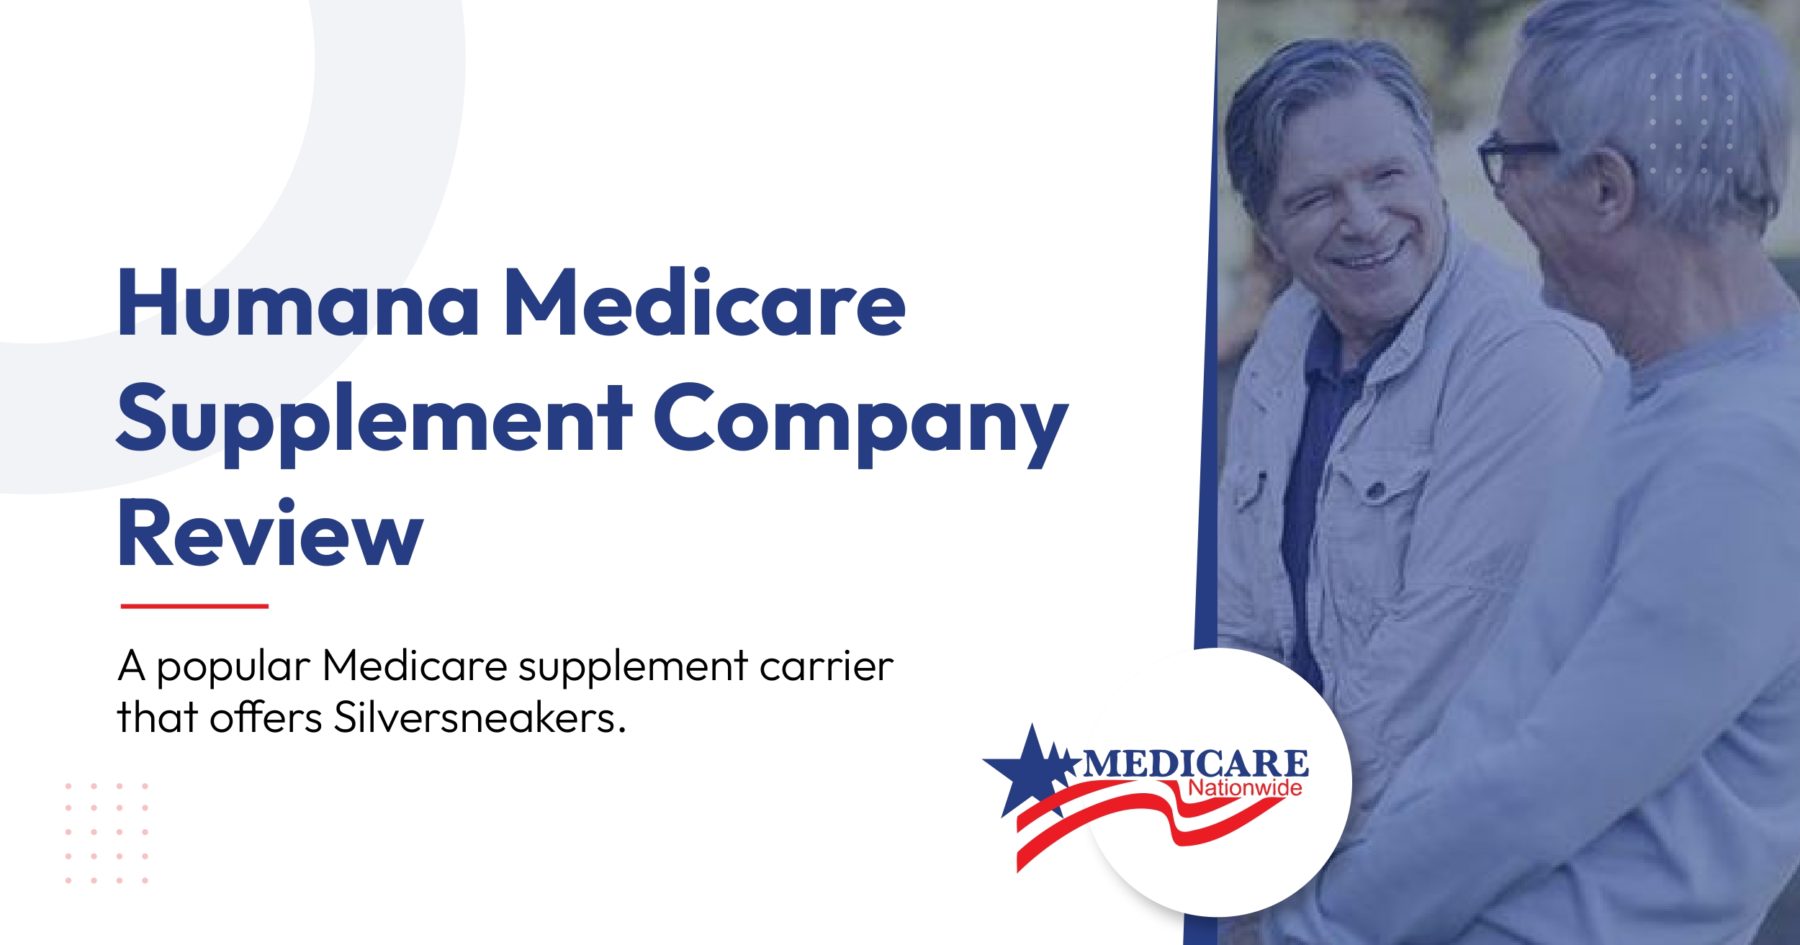 Humana Medicare Supplement Company Review